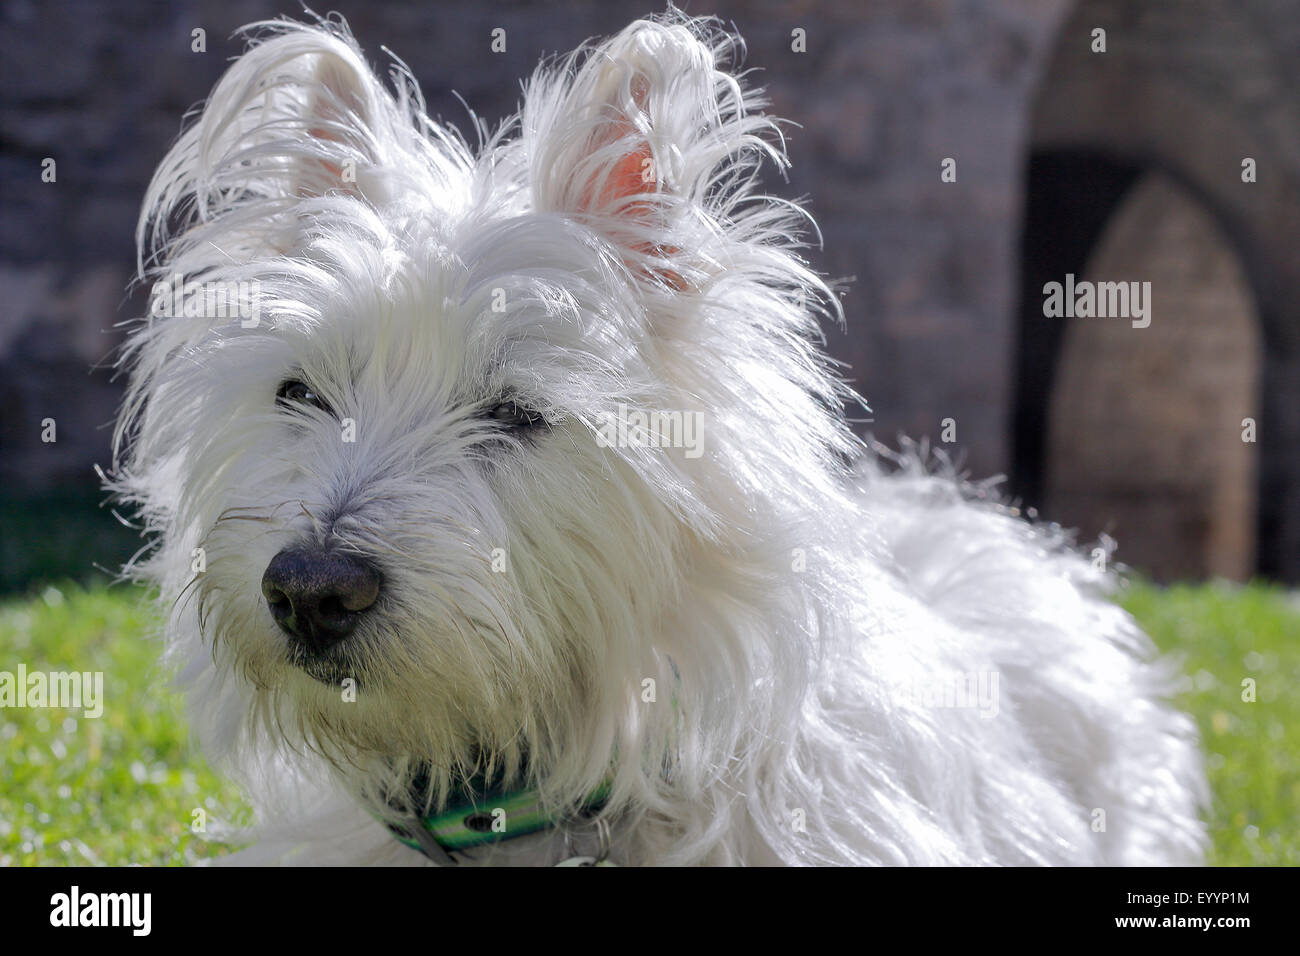 West Highland White Terrier puppy, Banque D'Images